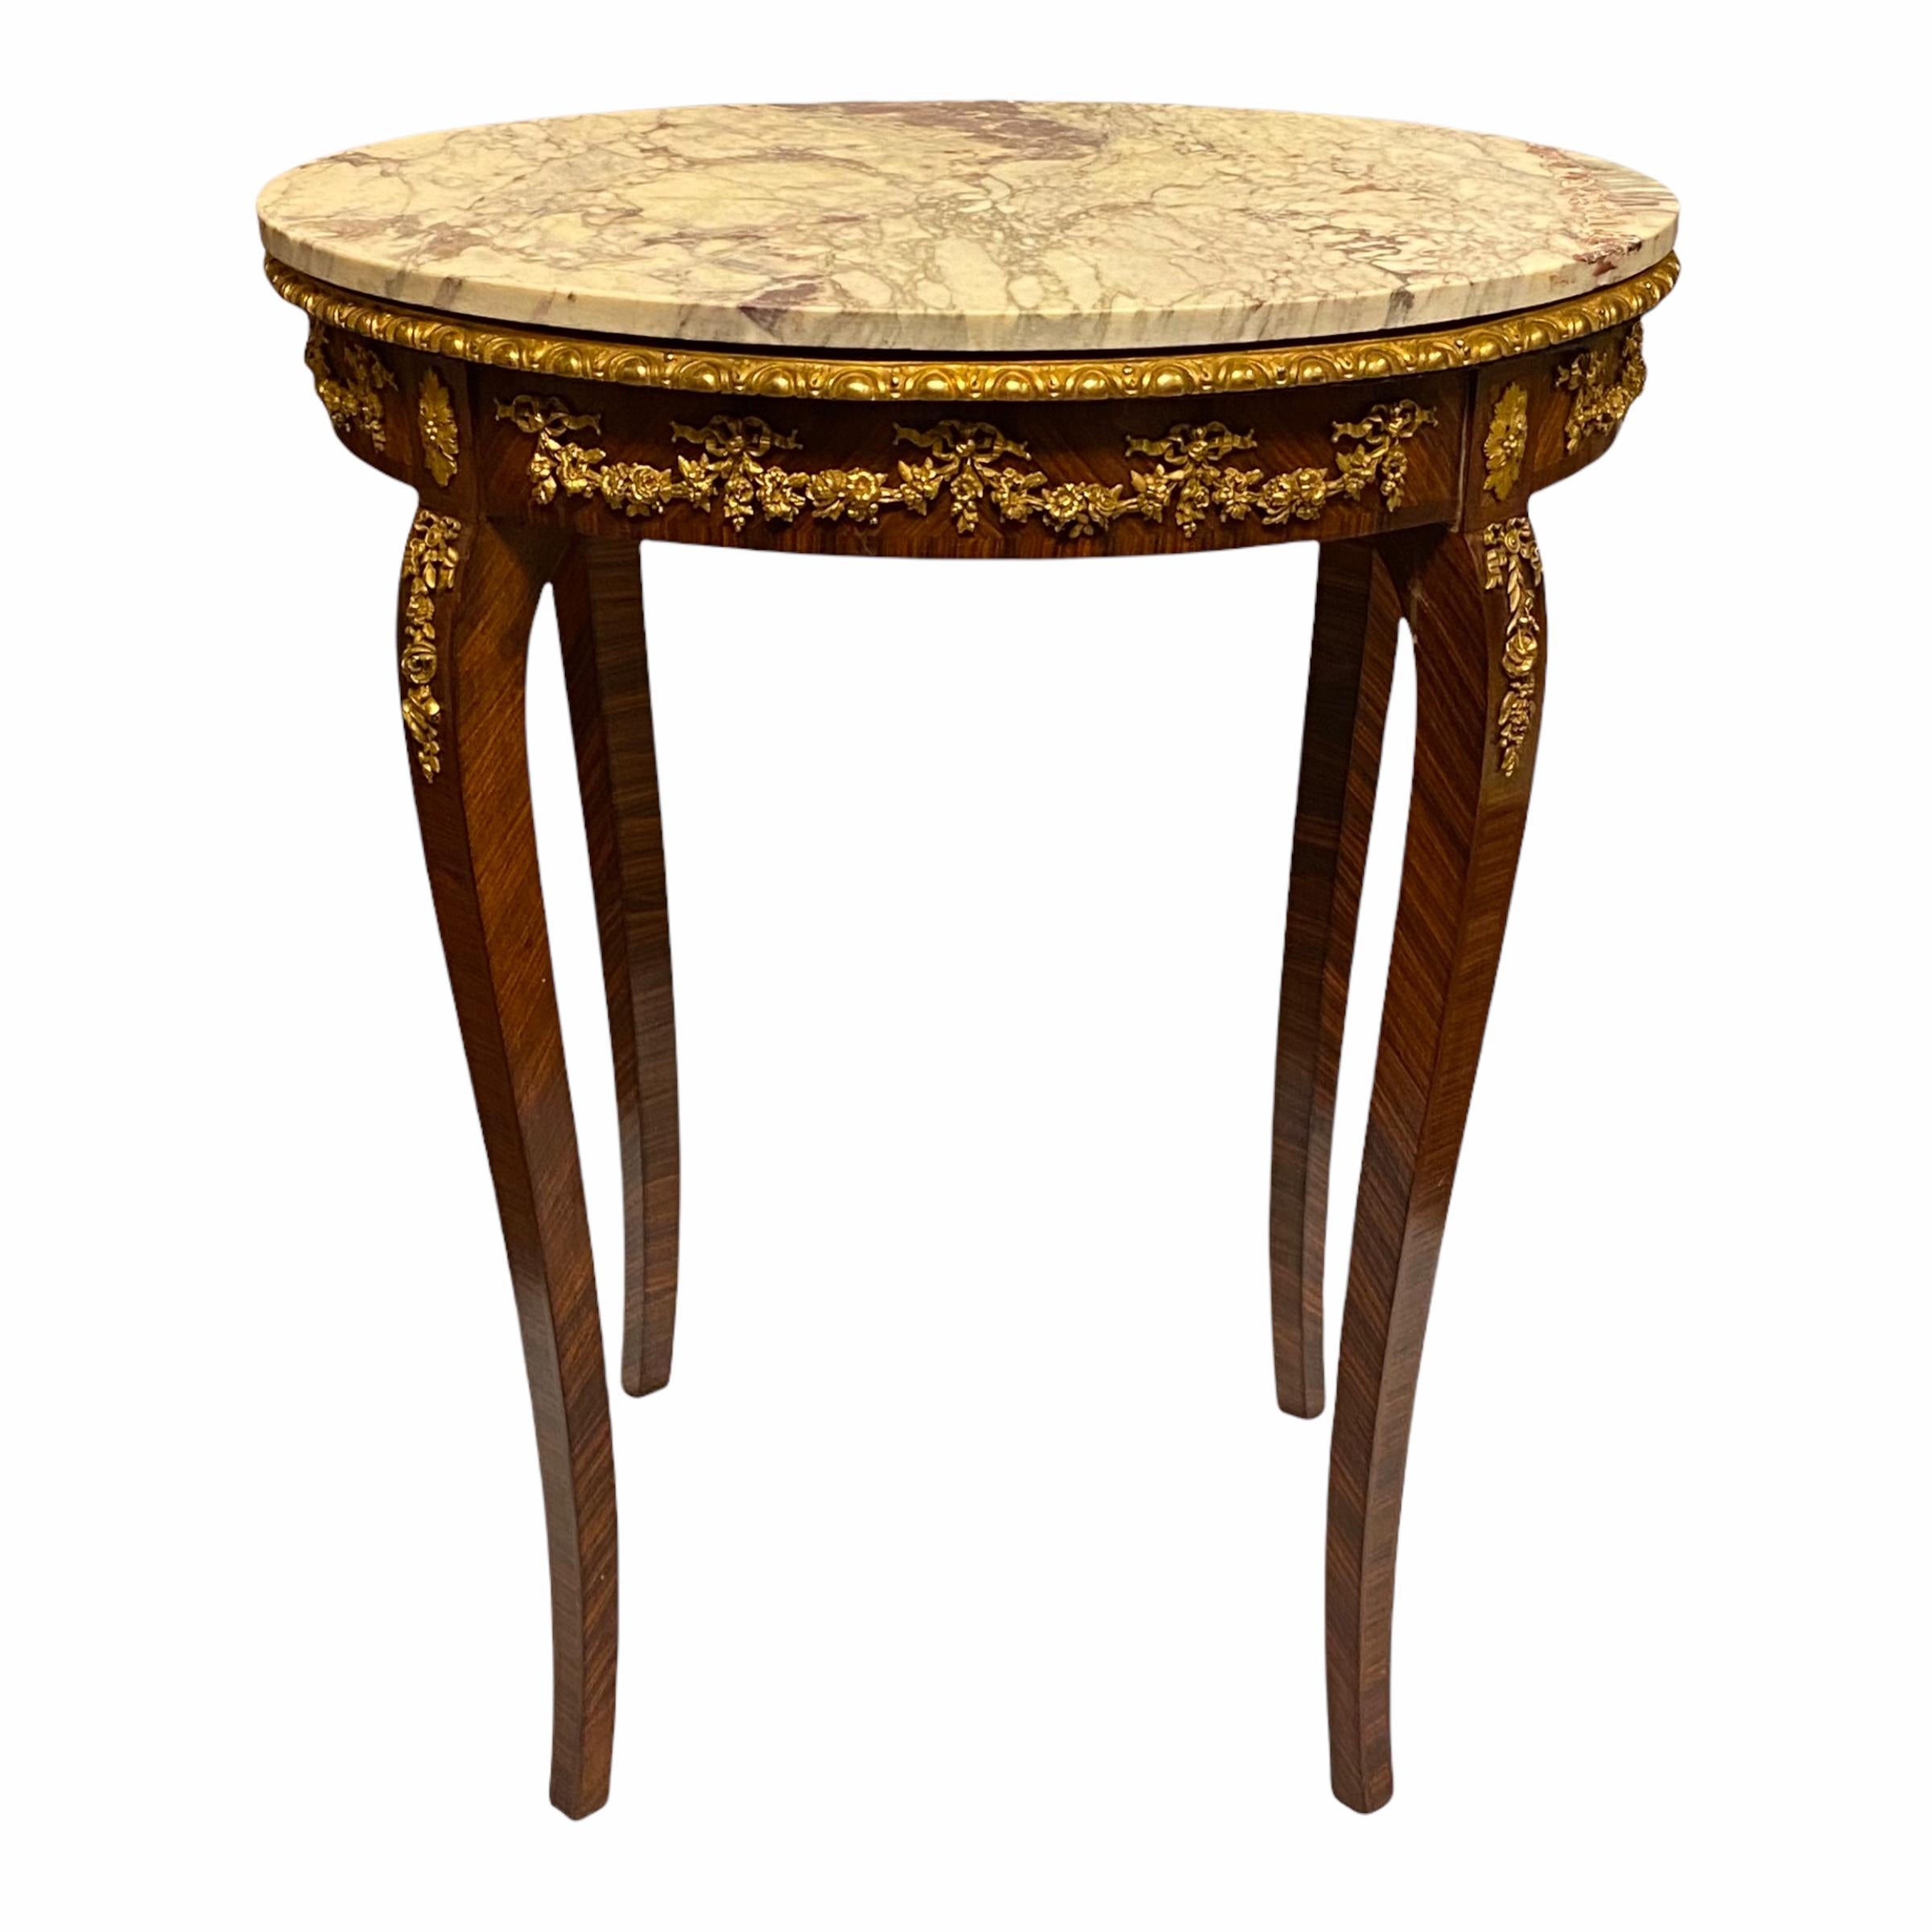 A very fine quality French 19 century Louis XVI style round marble top side table.